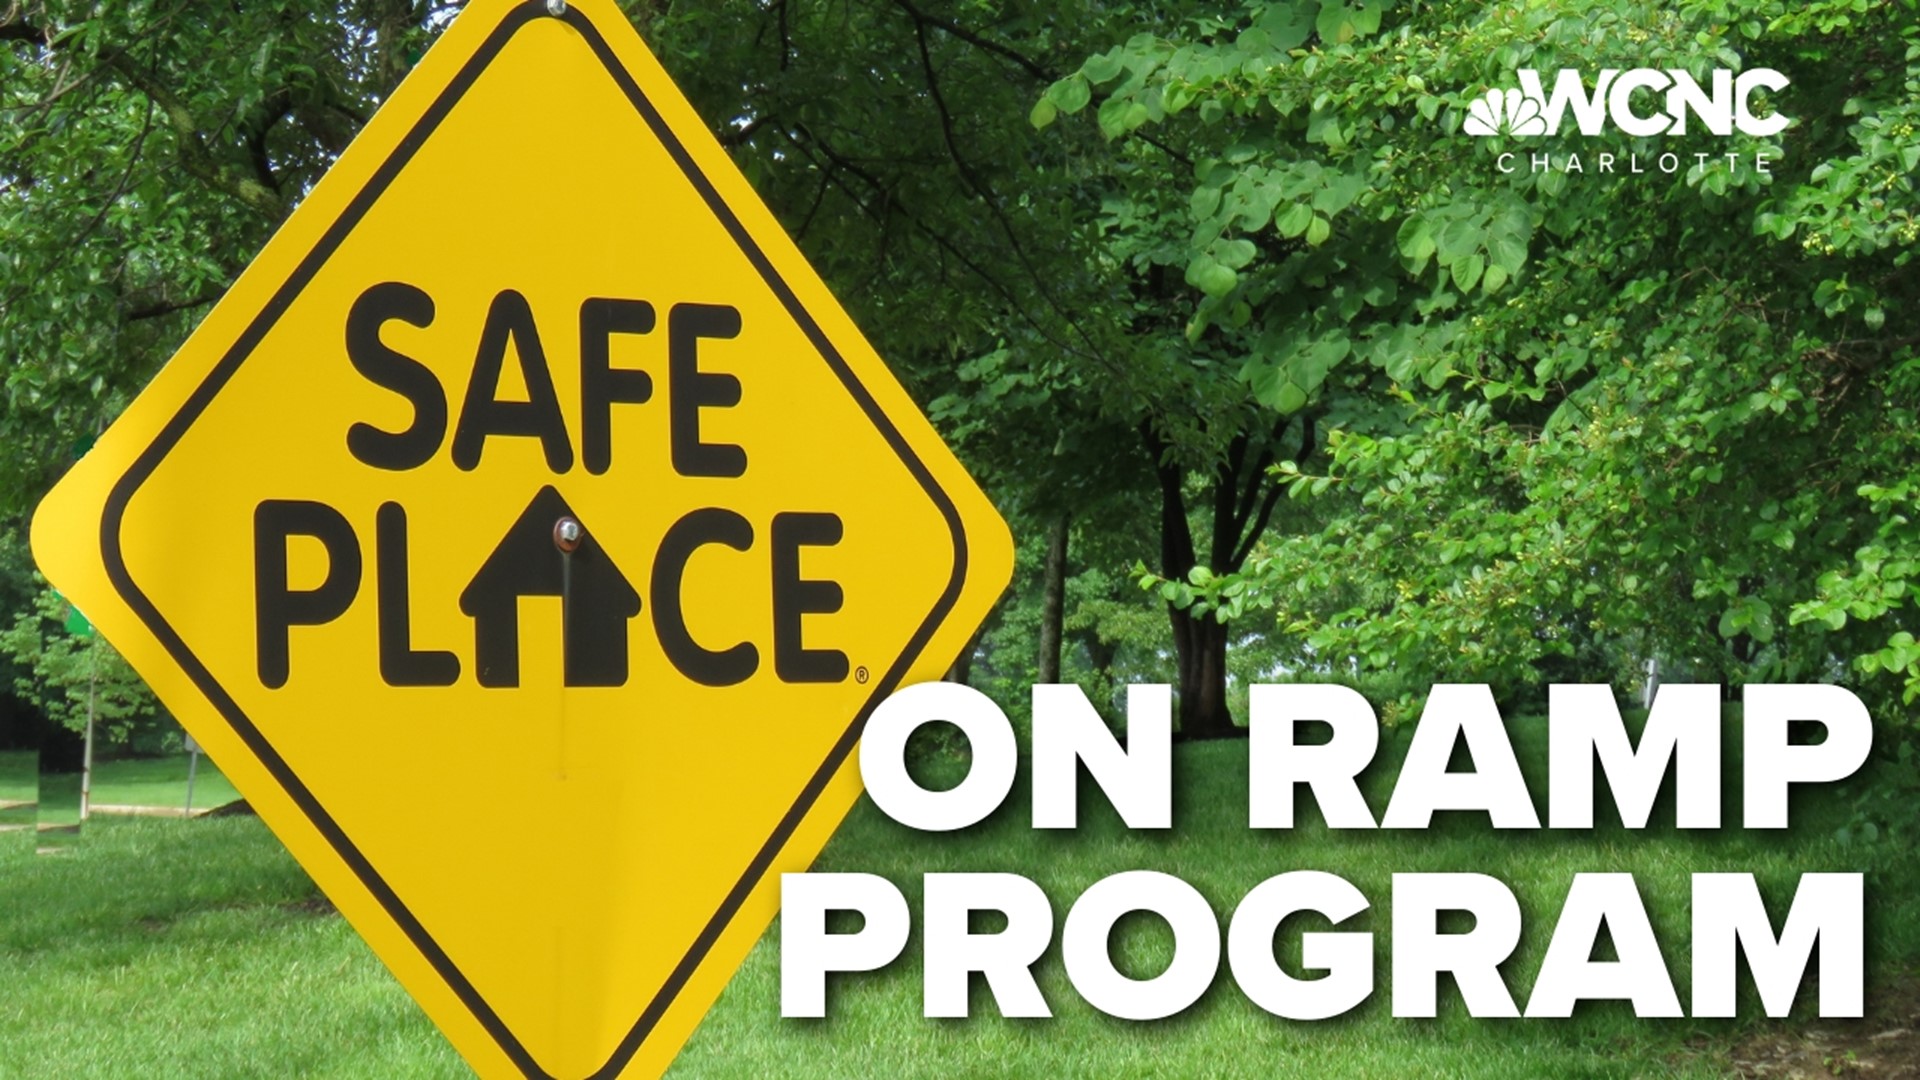 The Relatives' 'On Ramp' program provides support and resources for young adults in crises.